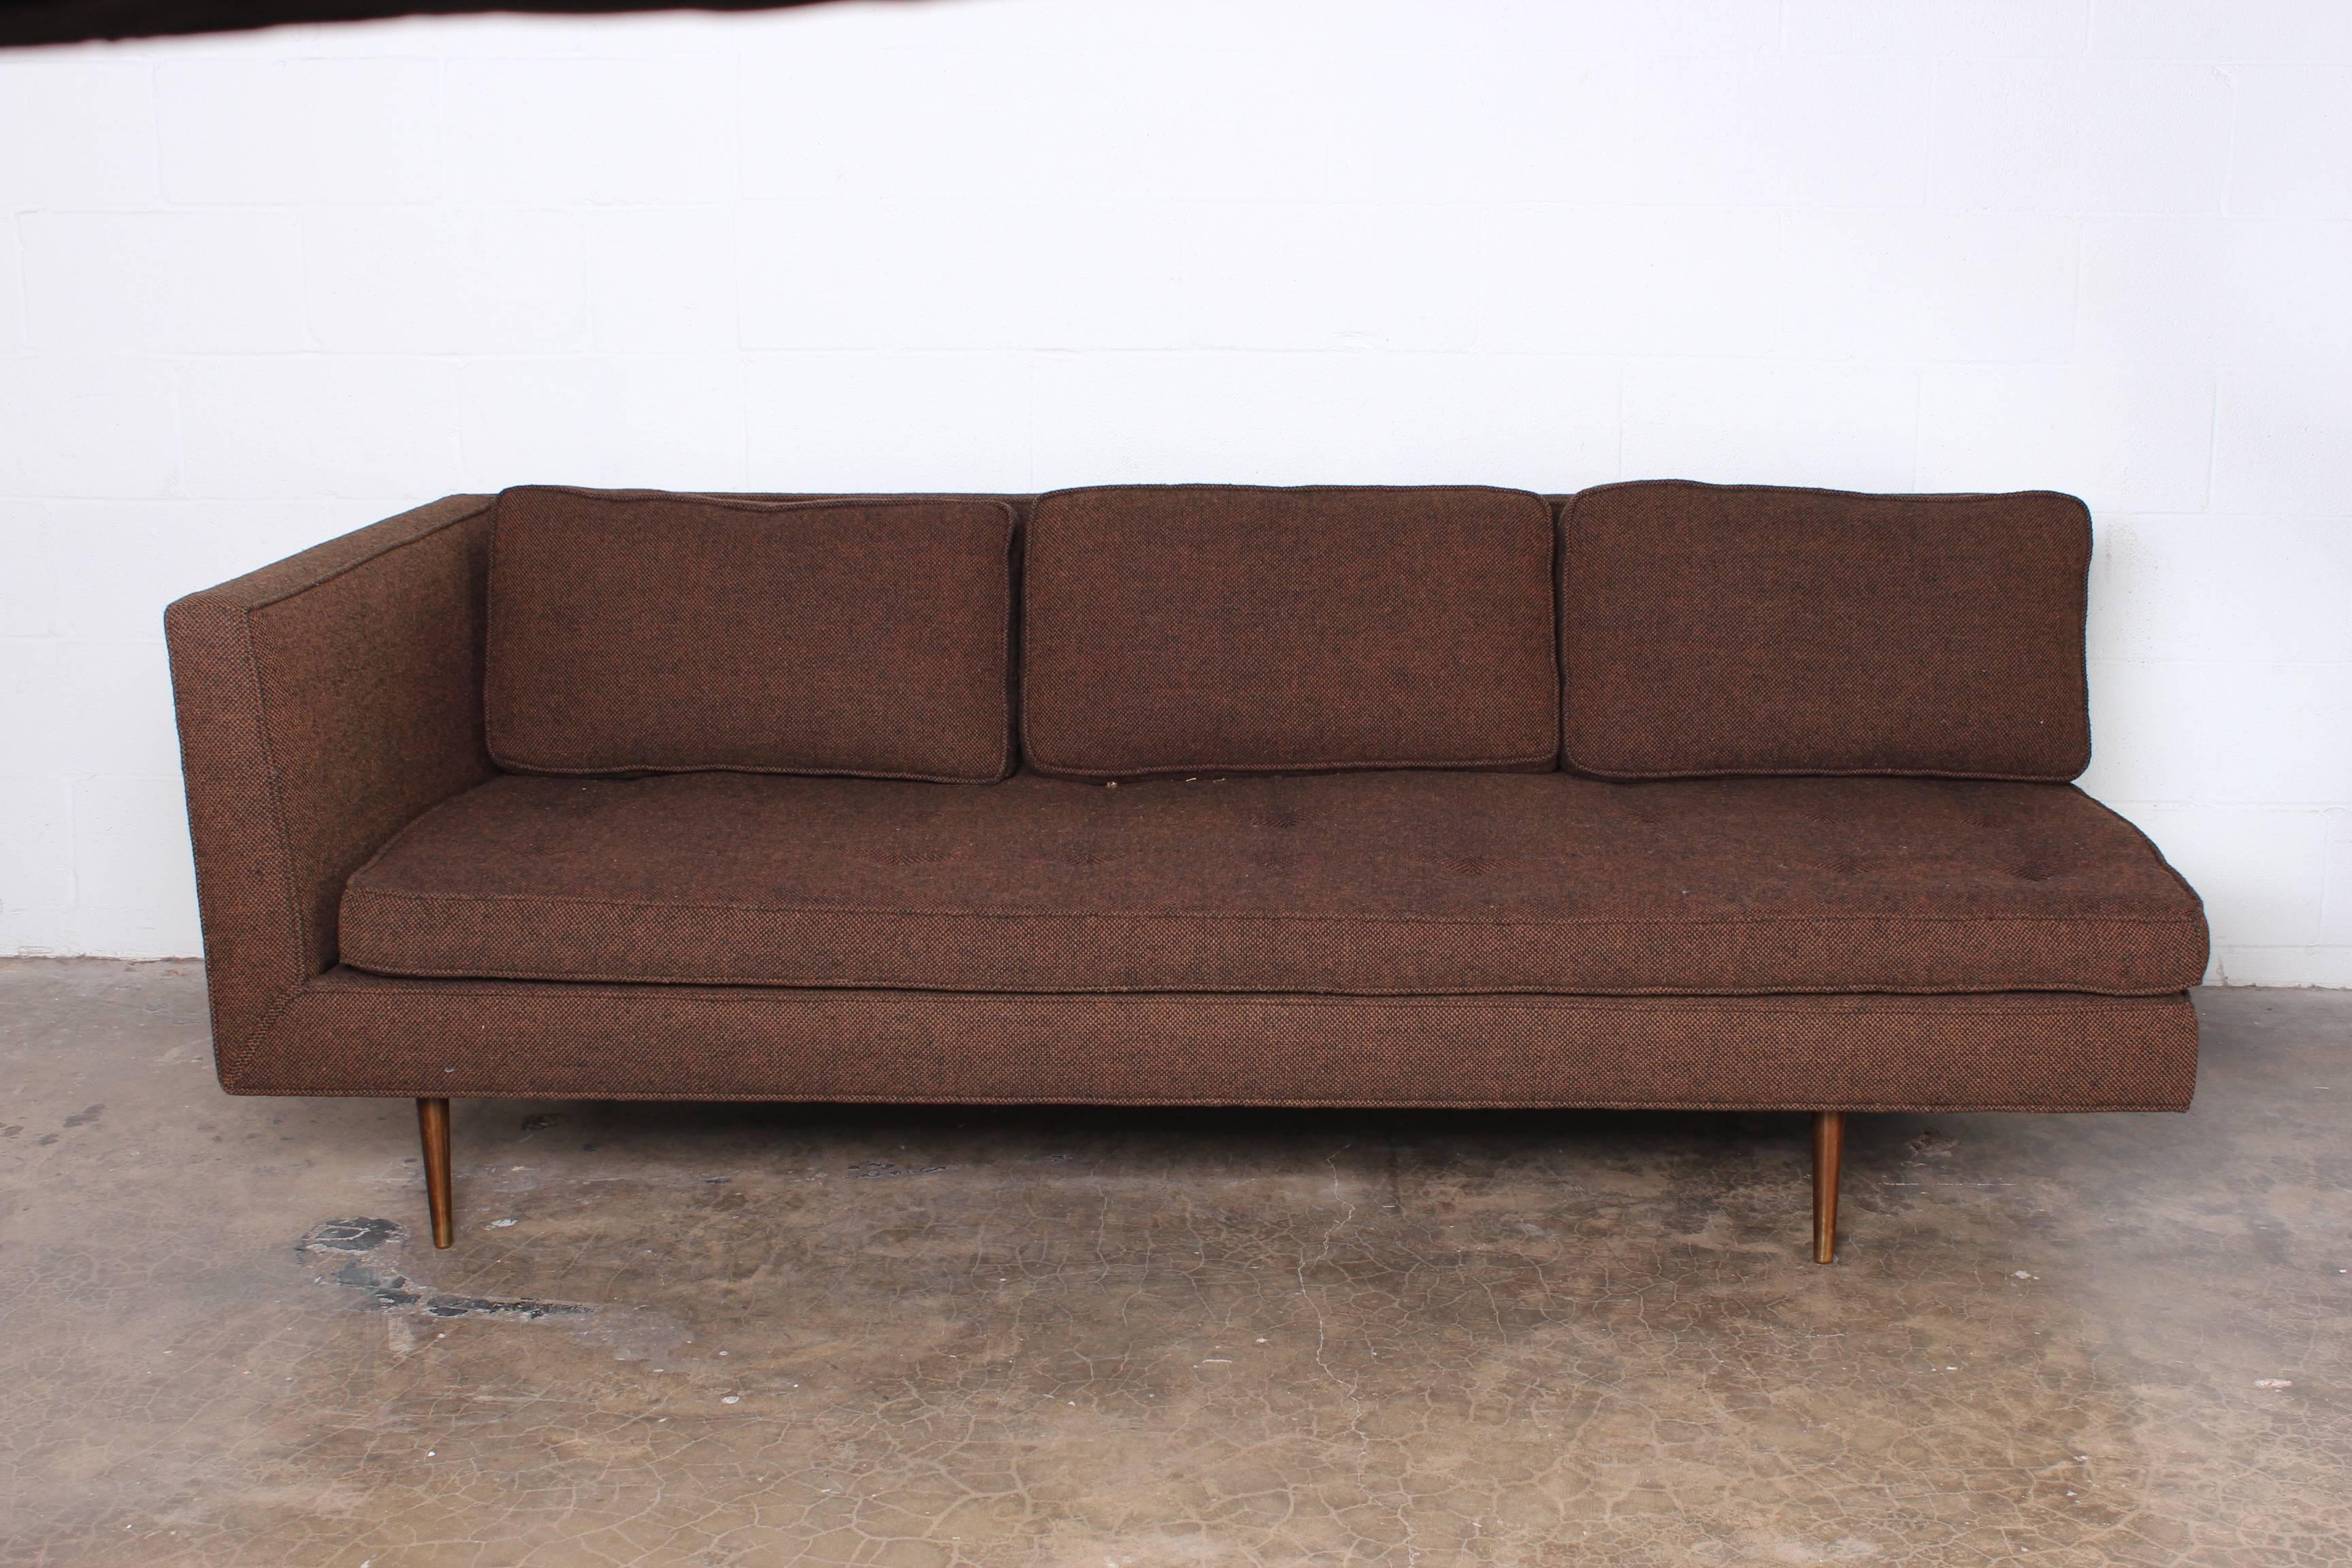 Sofa/Chaise by Edward Wormley for Dunbar In Good Condition For Sale In Dallas, TX